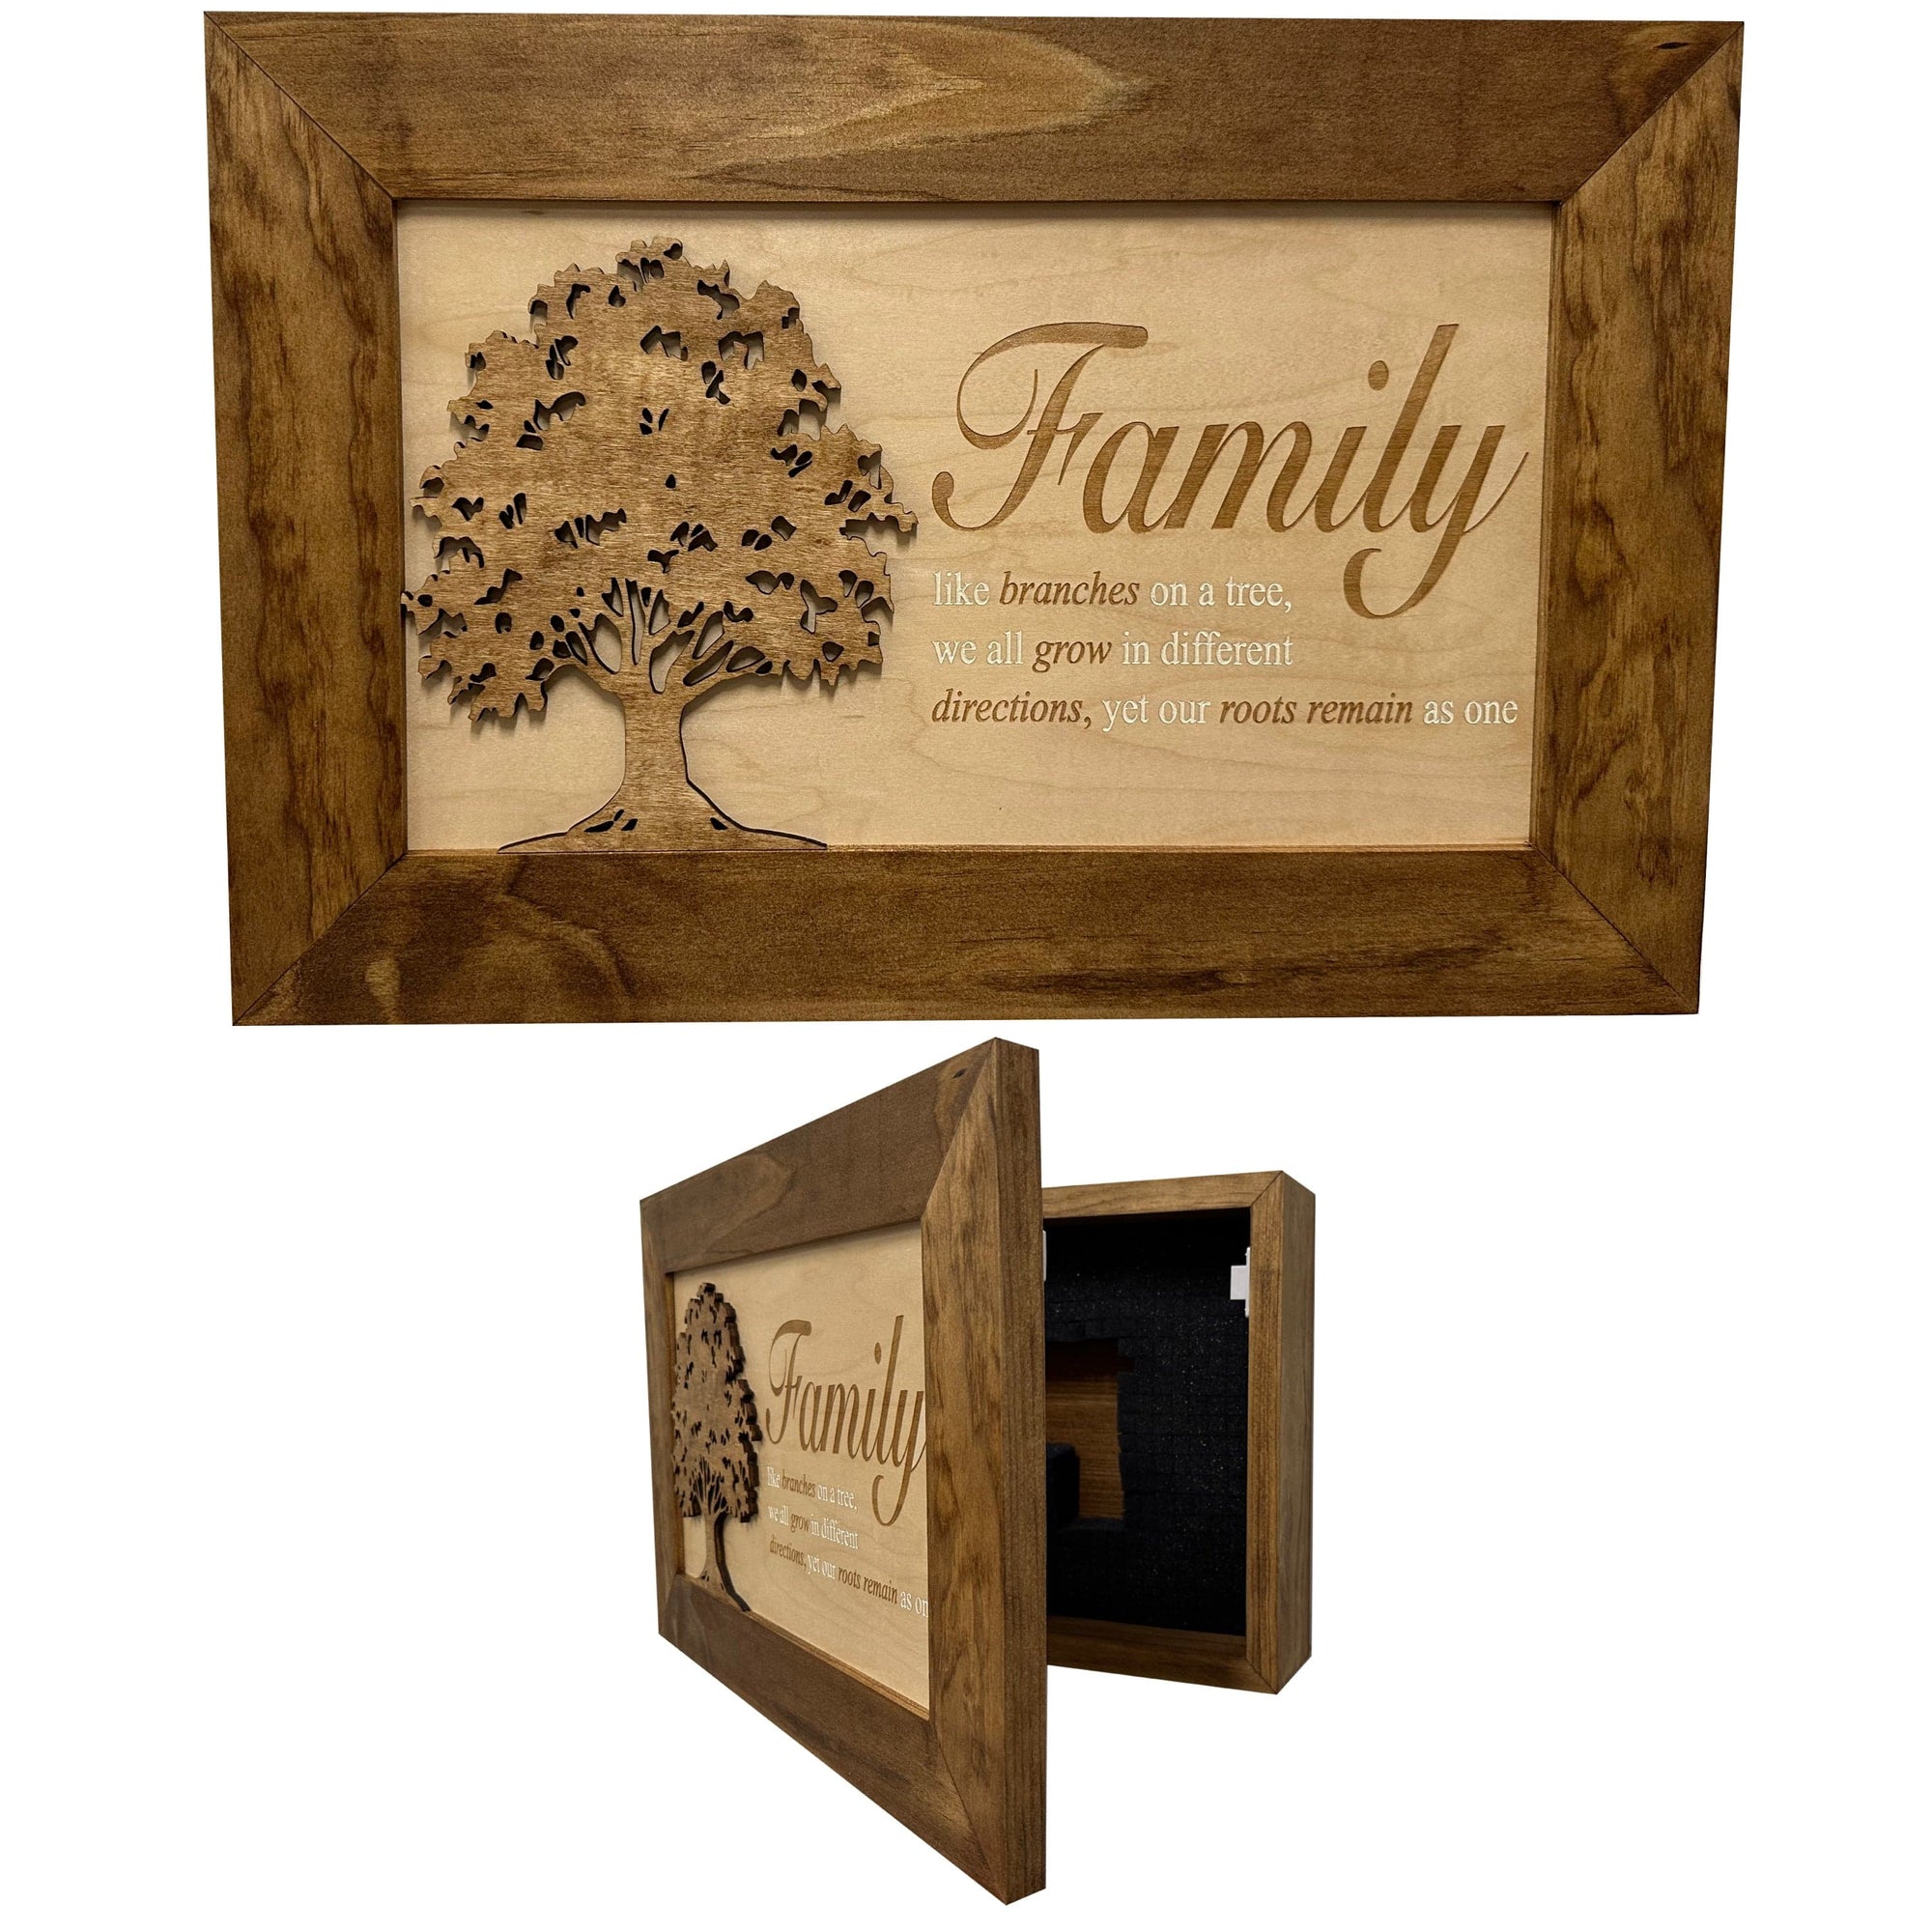 Decorative Secured Gun Storage Cabinet with Family Branches (Early American) Armadillo Safe and Vault